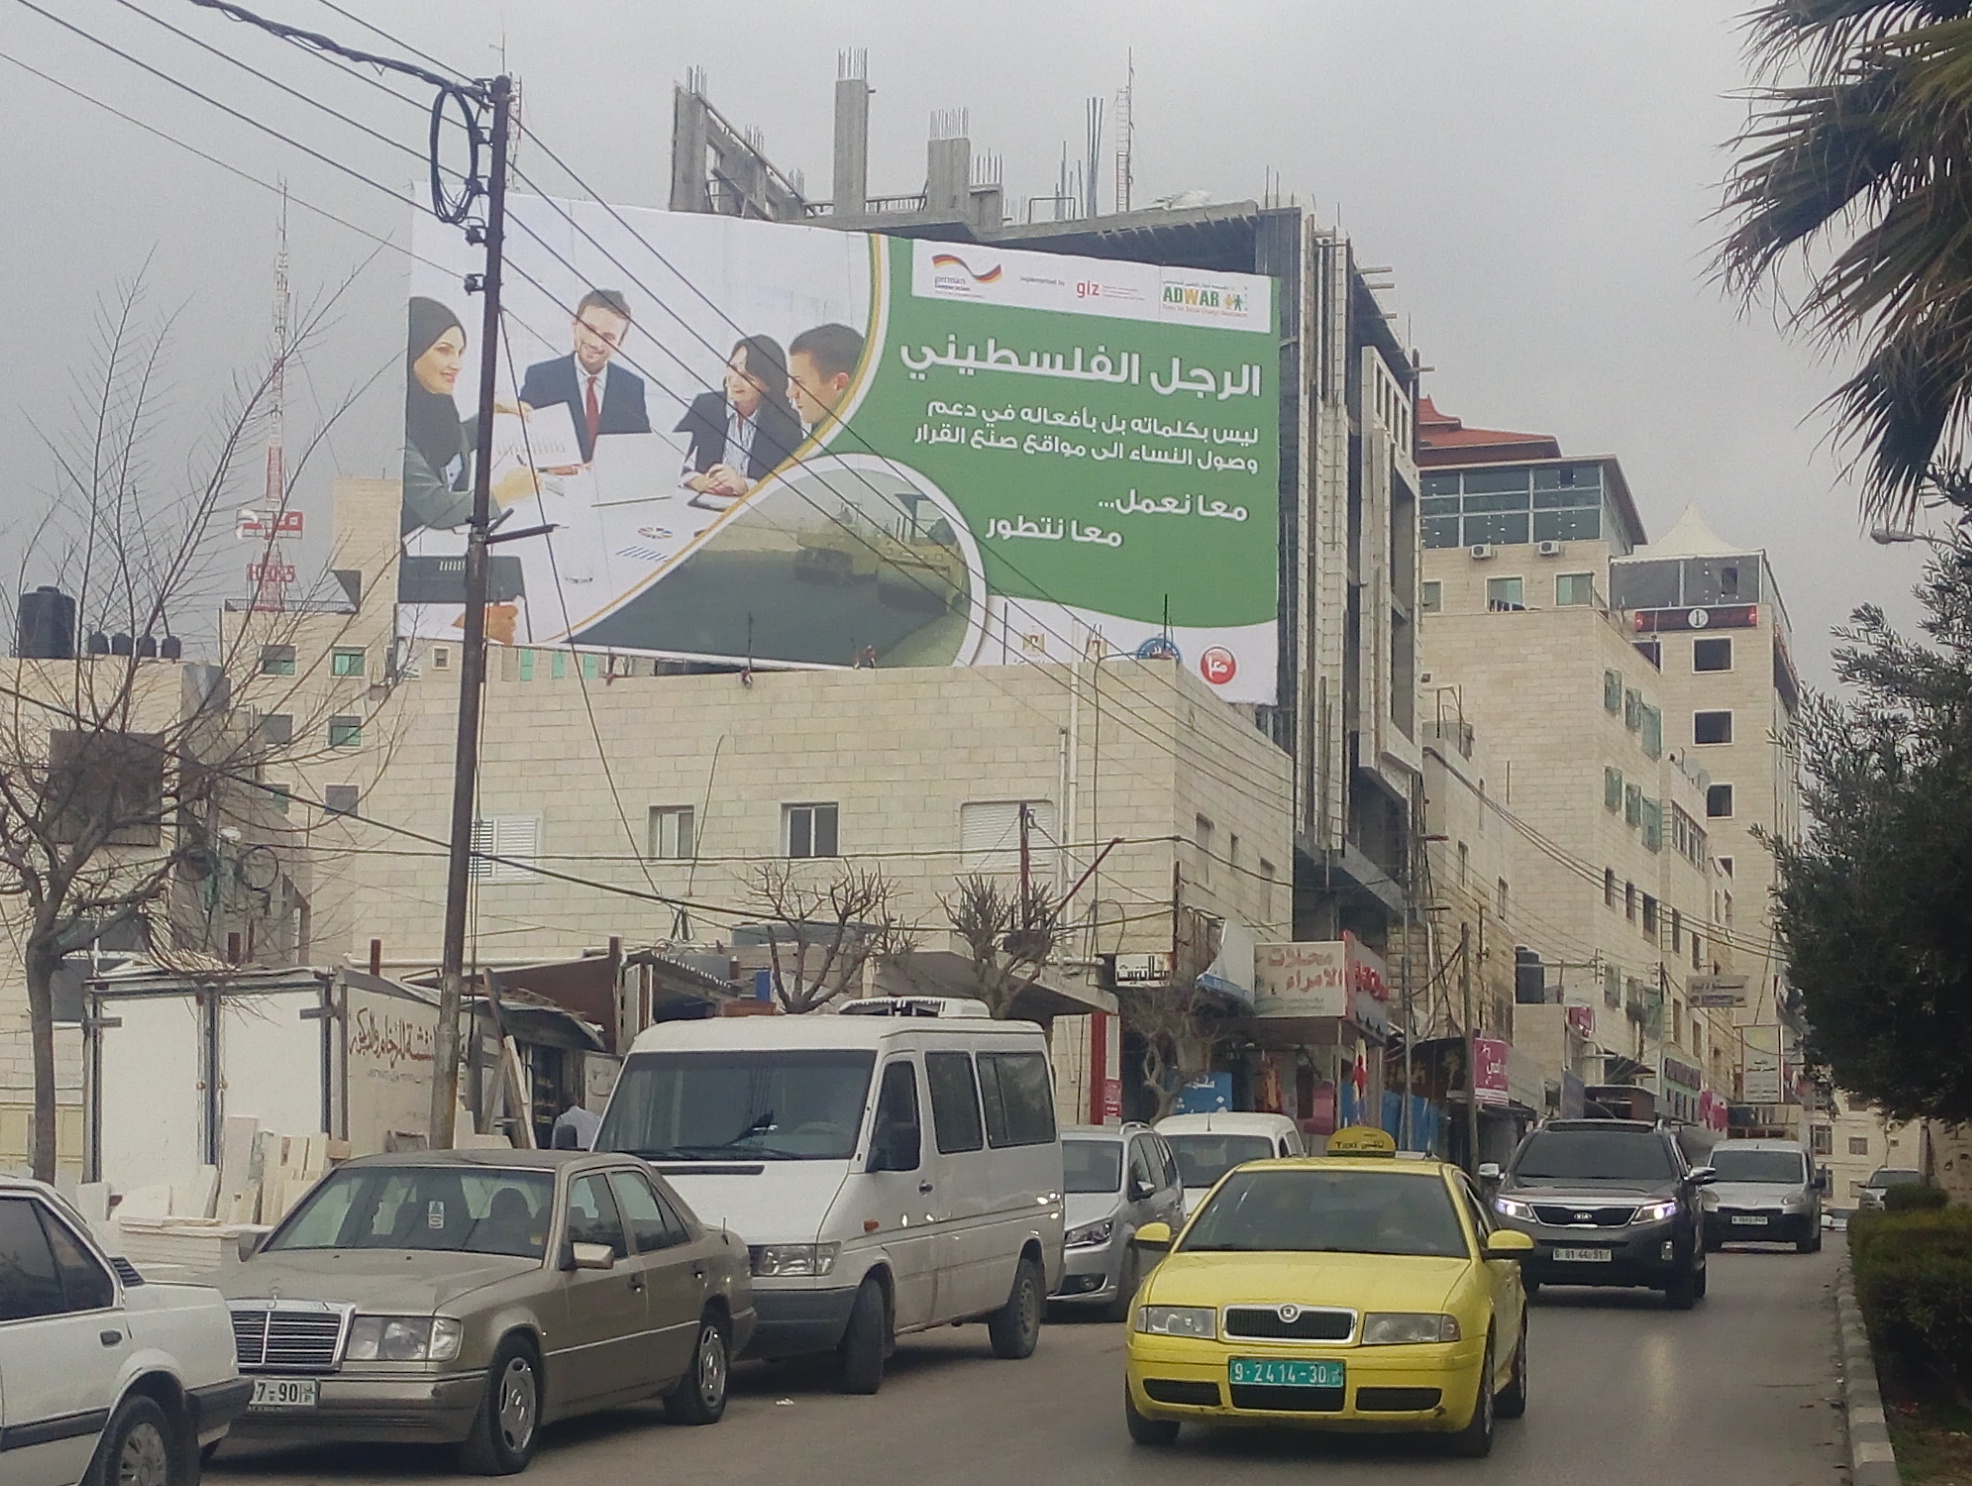  Billboards published on main streets of Hebron and Jerusalem governorates to increase awareness of the importance of women’s political participation